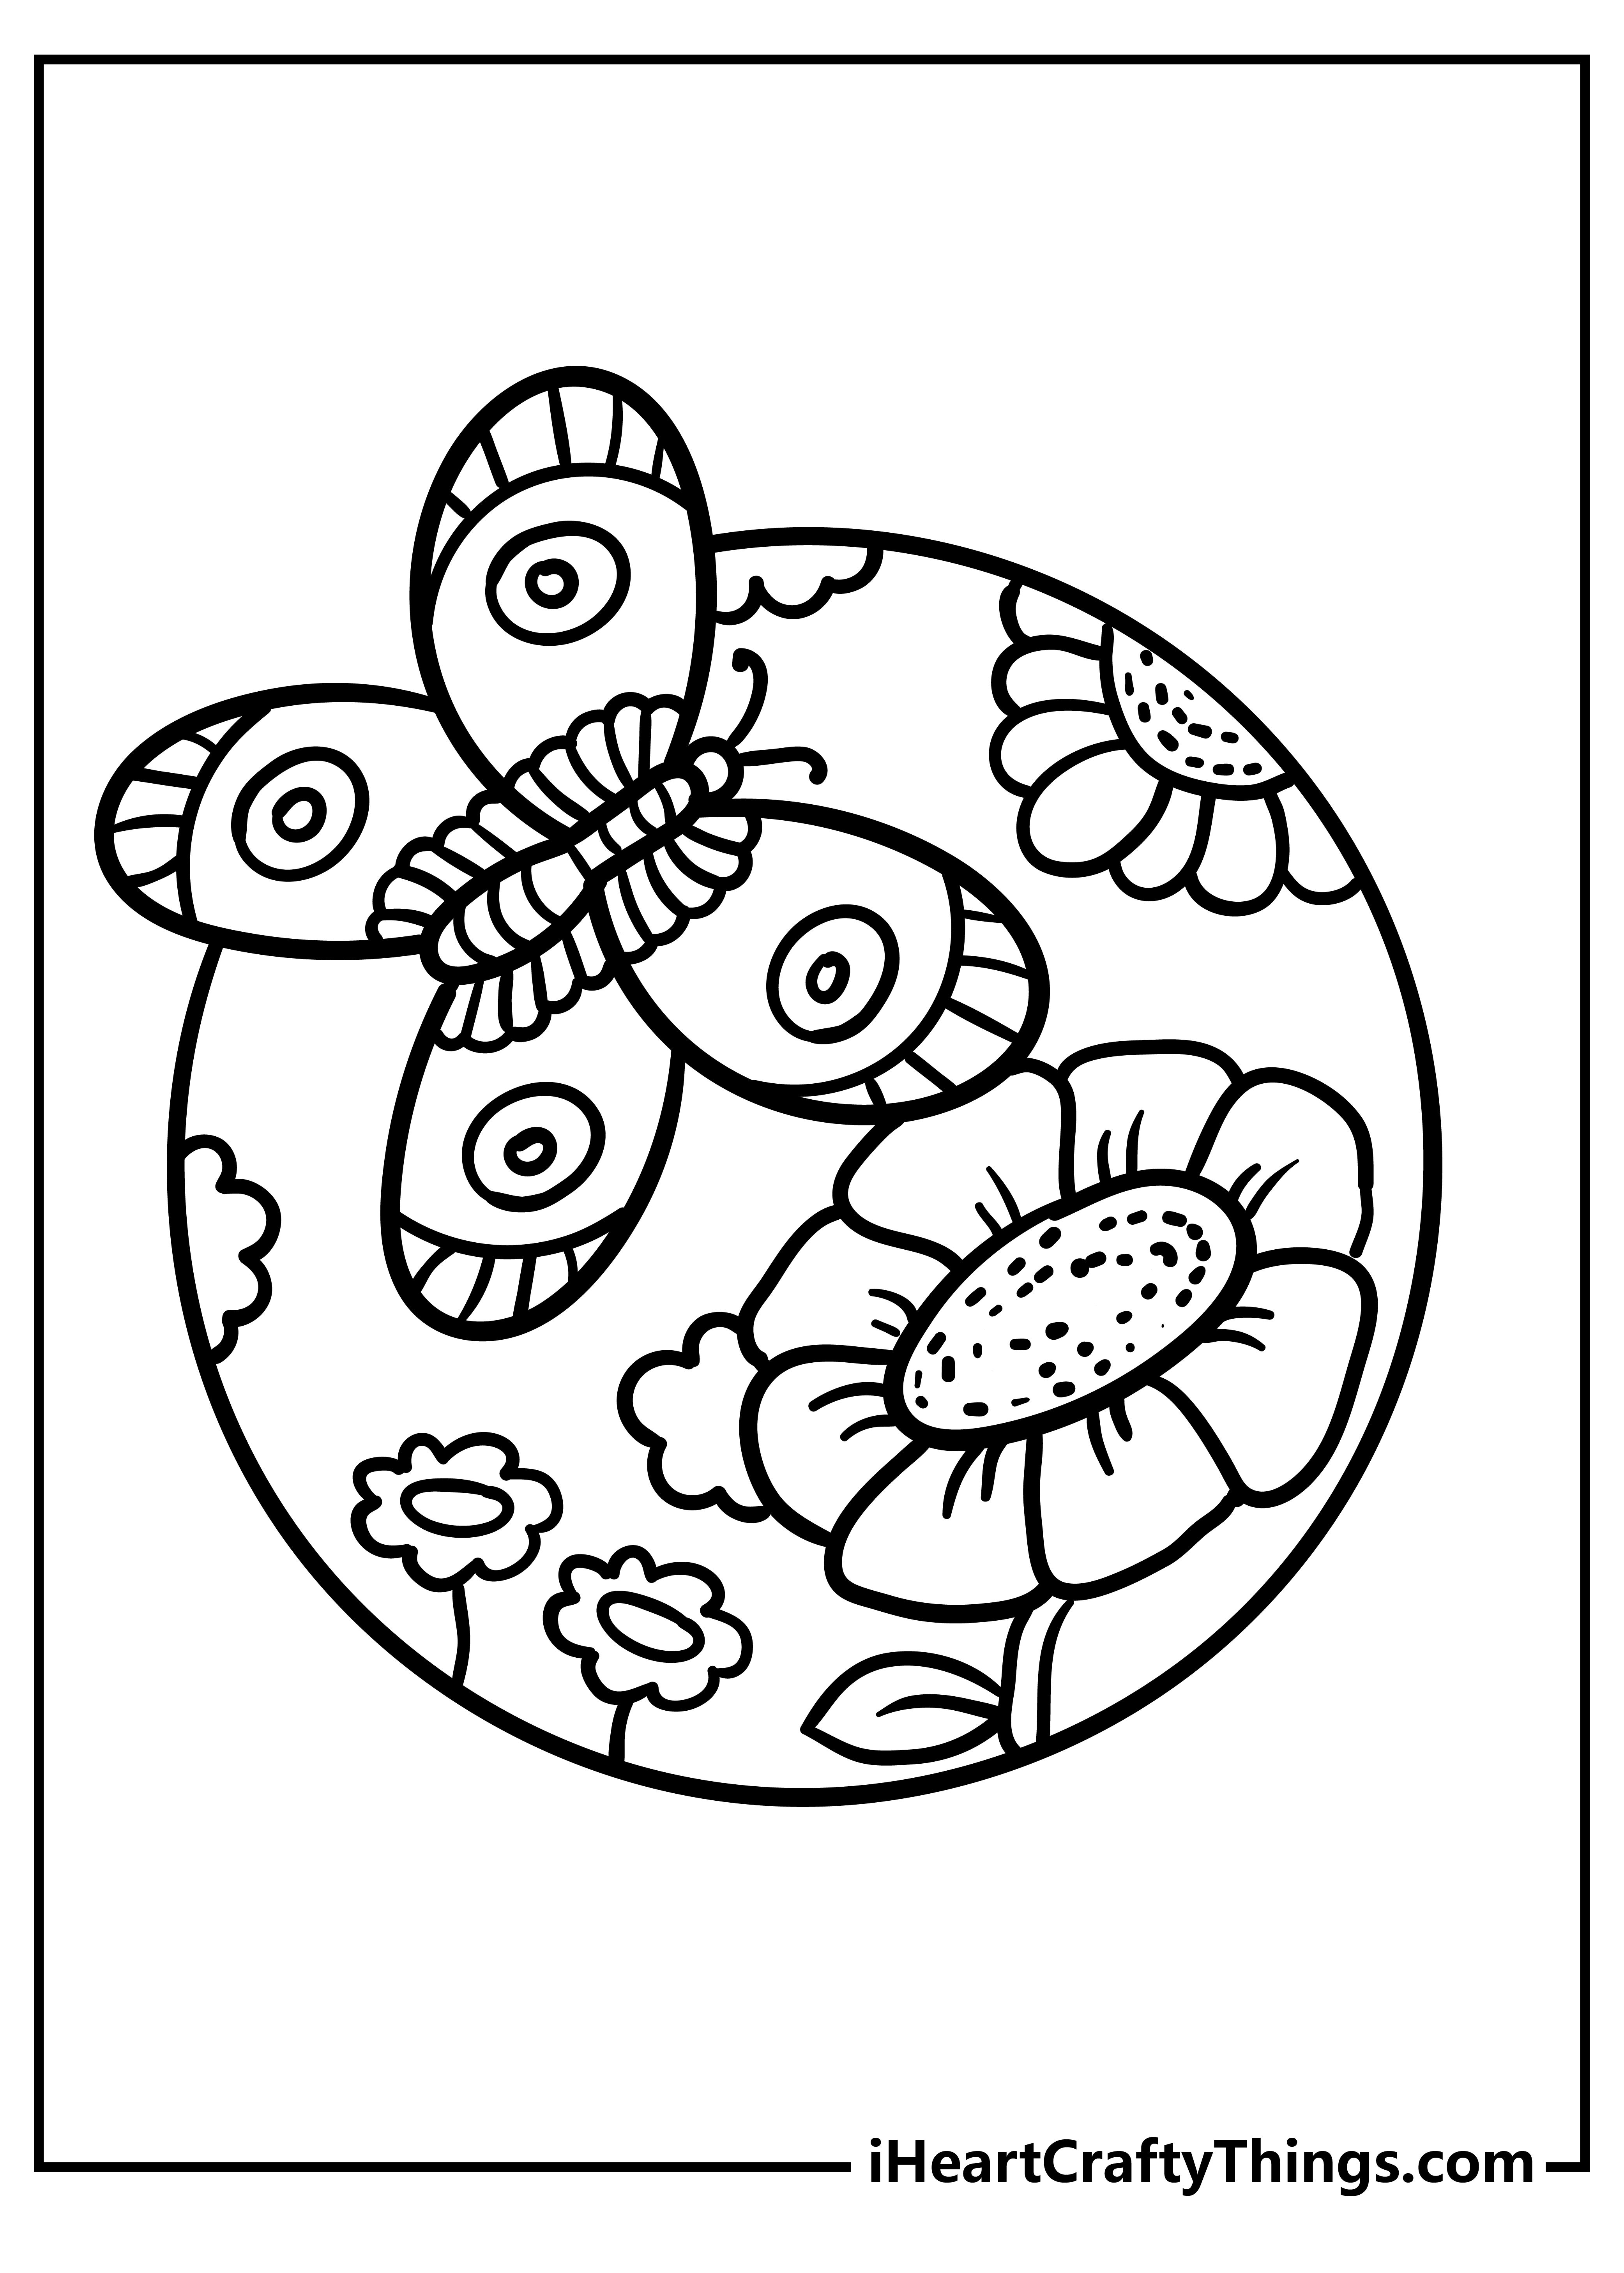 Printable Nature Coloring Pages Updated 18